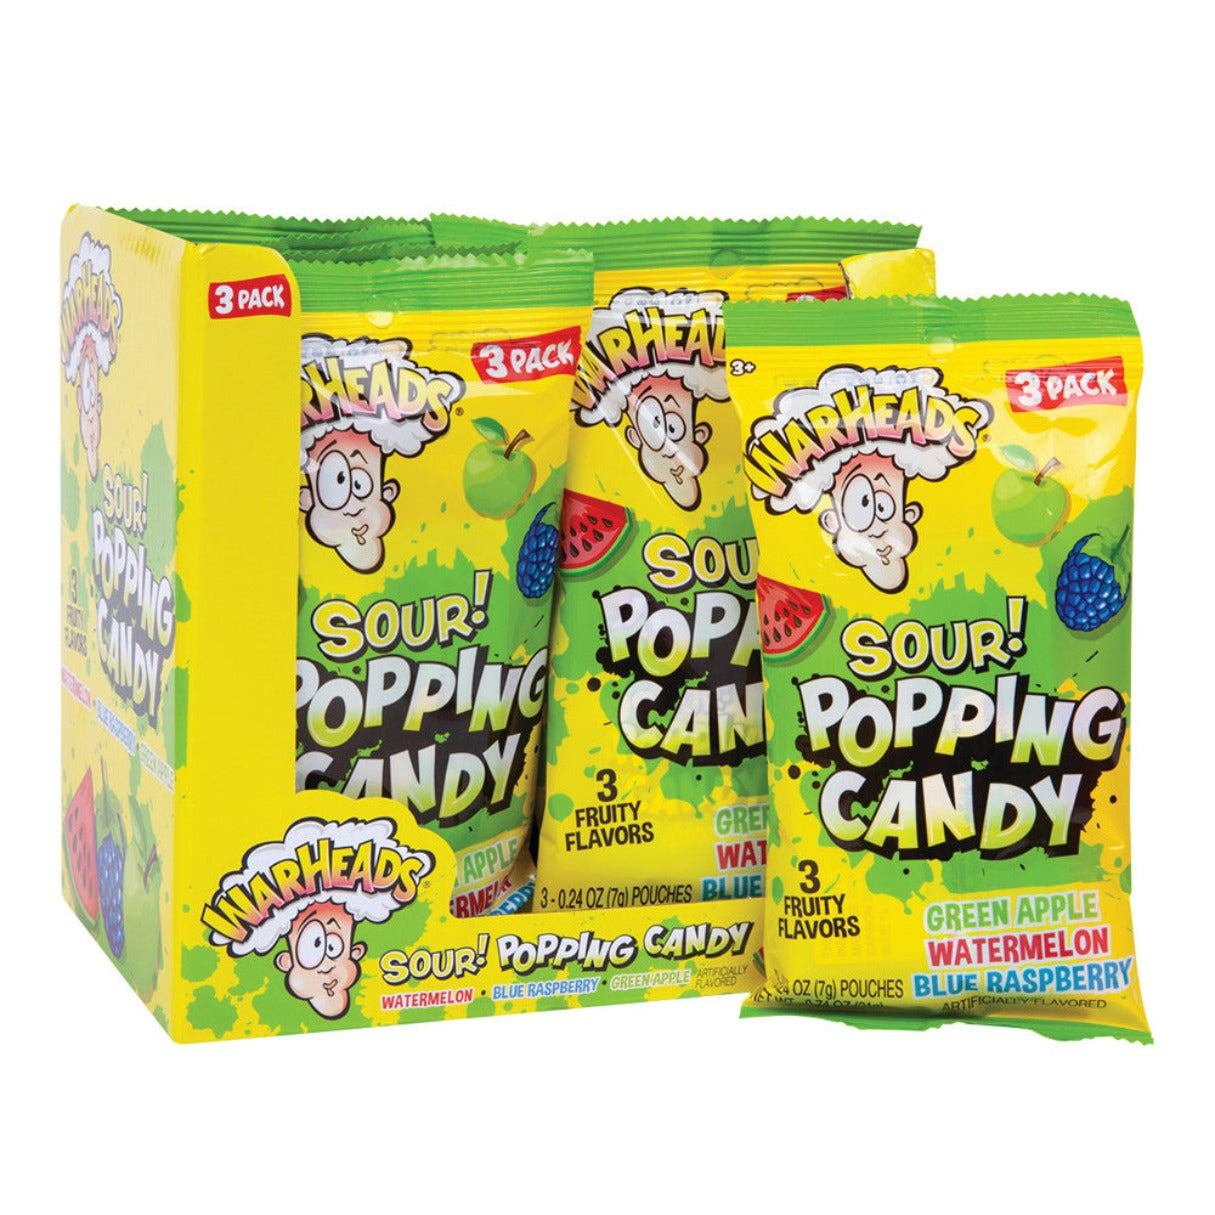 Warheads Sour Popping Candy 0.74oz - 12ct